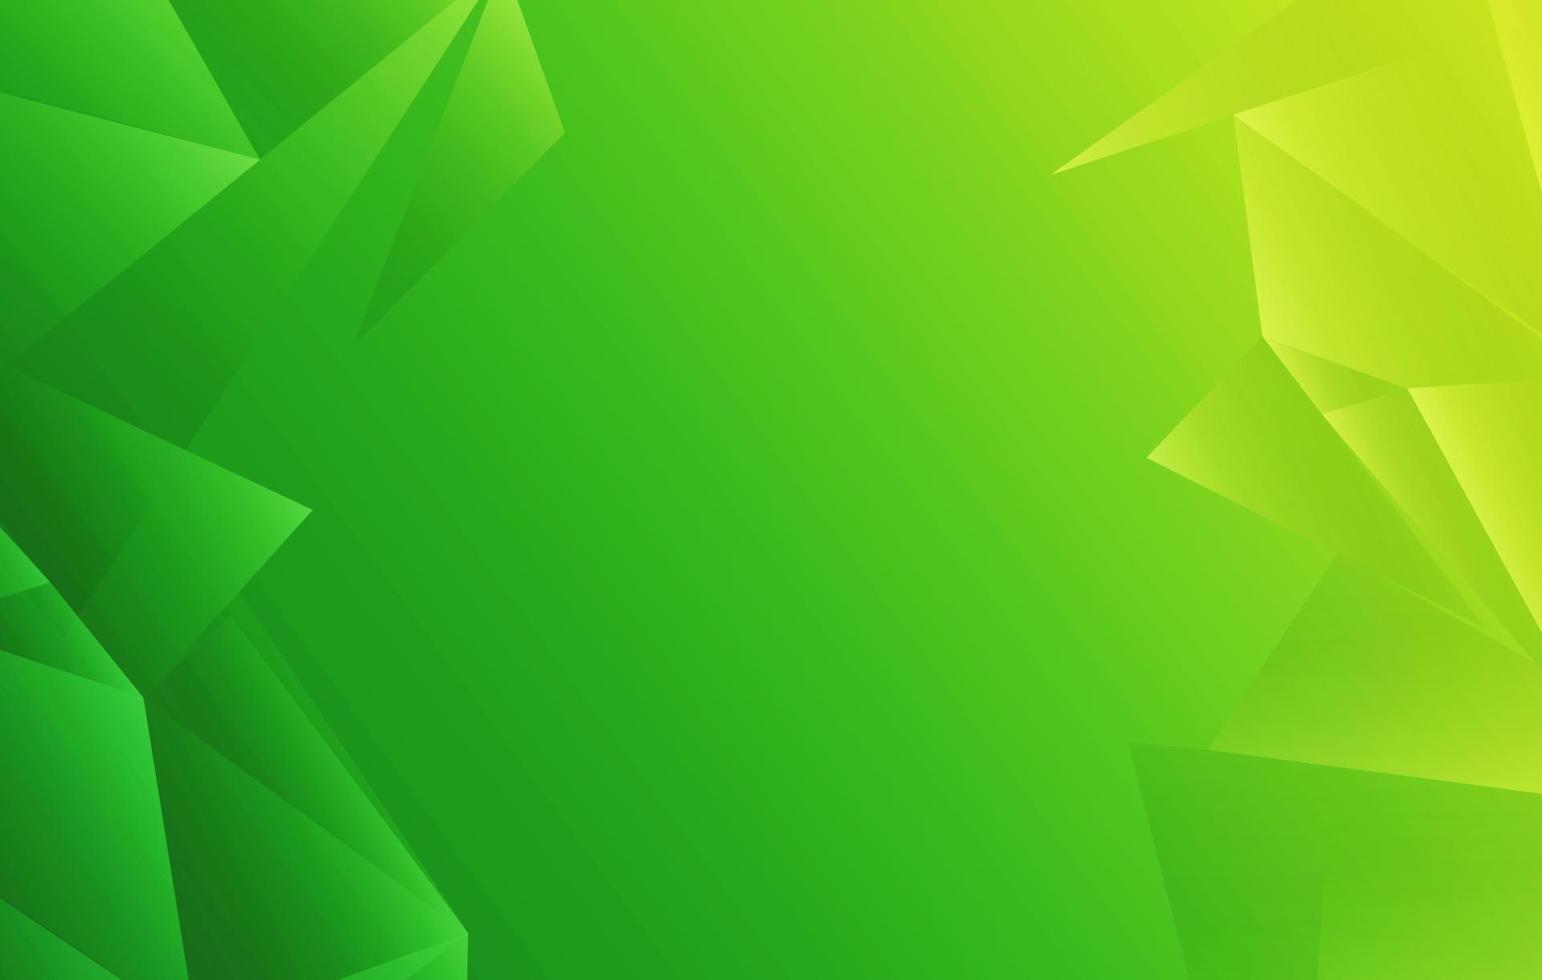 Green Abstract geometric shape background vector